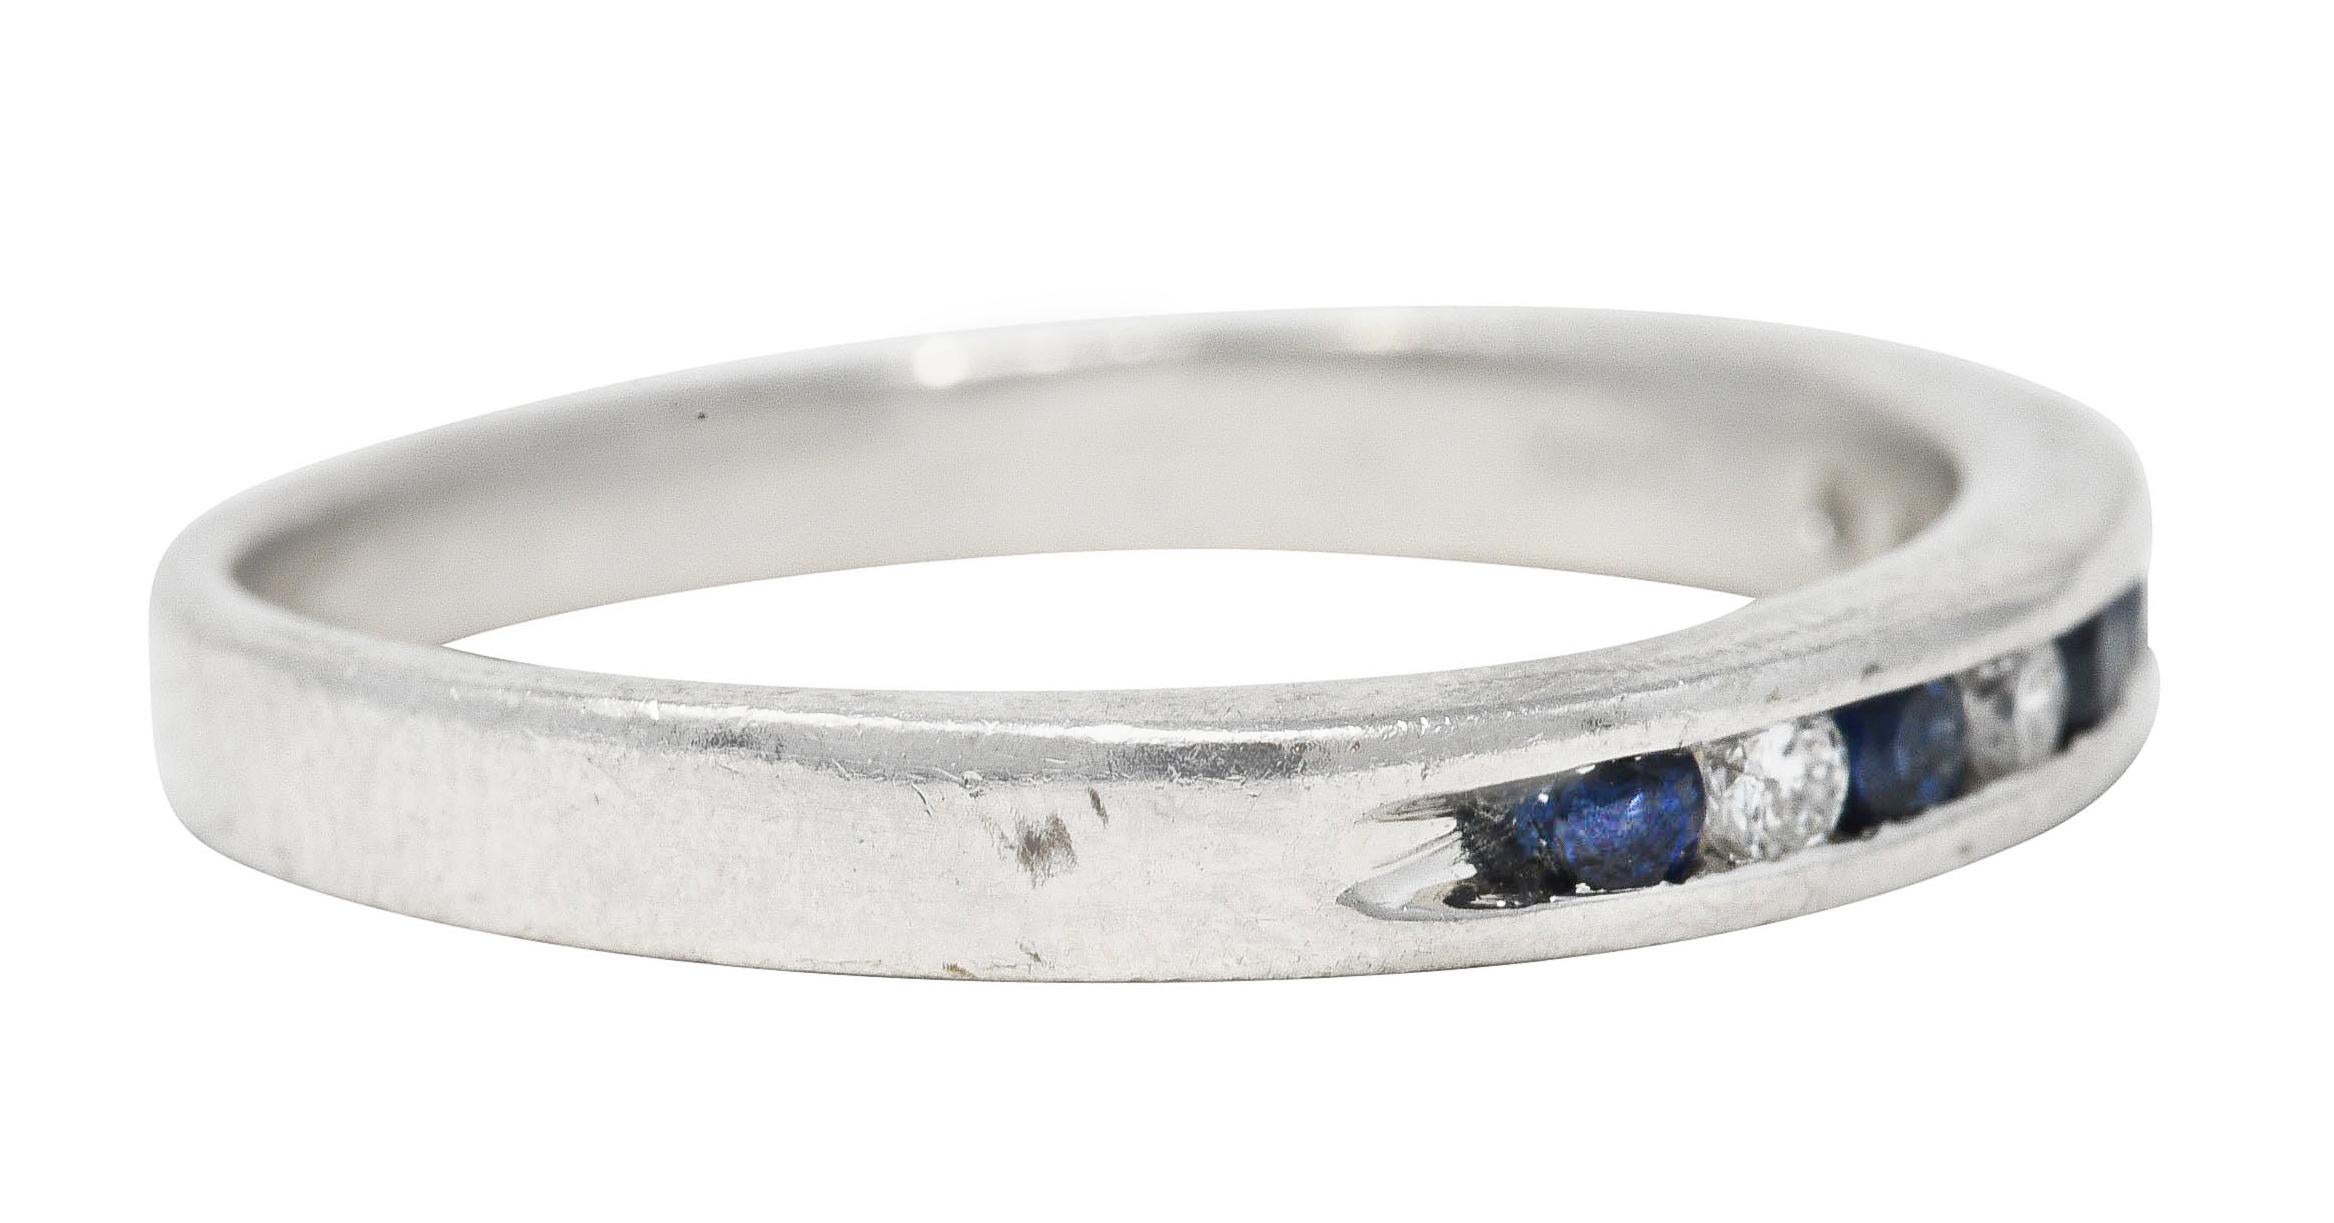 Band ring features four round brilliant cut diamonds channel set to front

Weighing approximately 0.12 carat total - eye clean and bright

Alternating with five round cut sapphires weighing approximately 0.21 carat total

Semi-transparent blue with